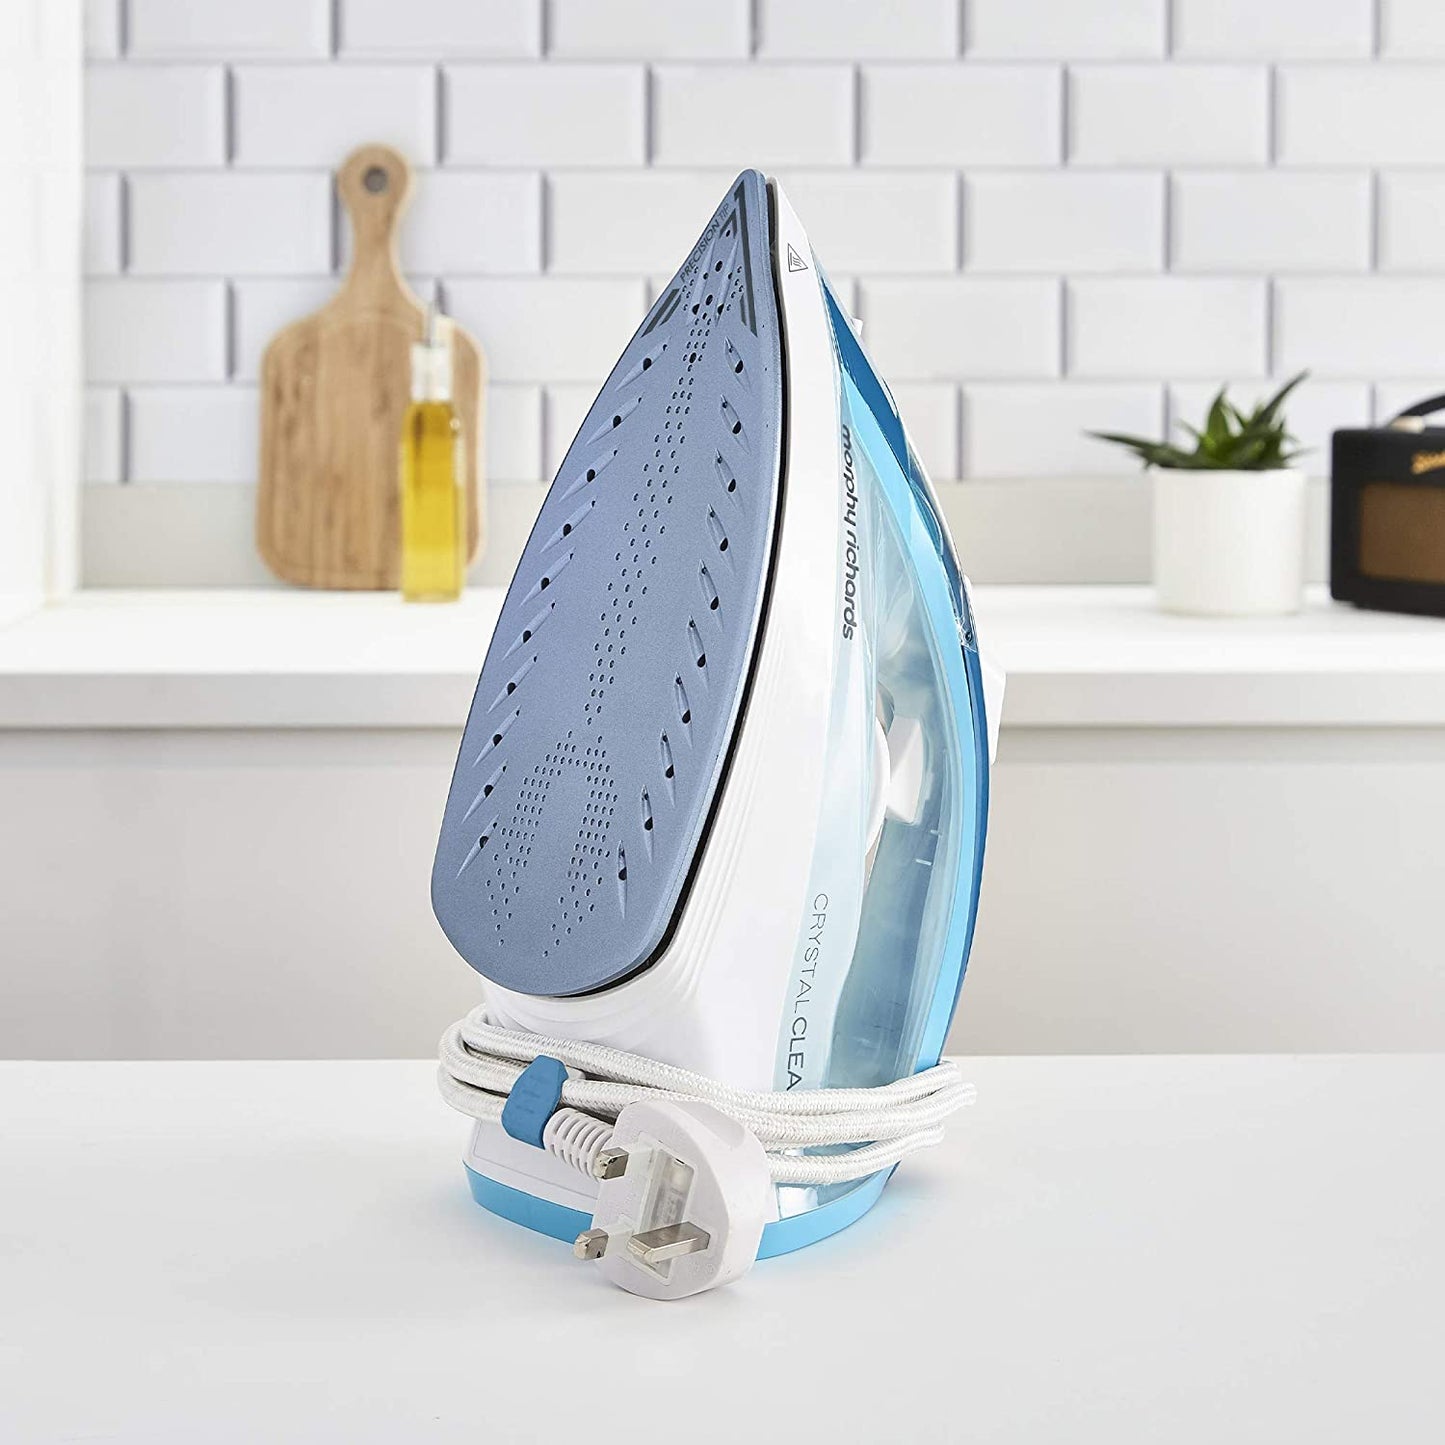 Morphy Richards 300300 Crystal Clear Steam Iron 2400W Turqoise/White